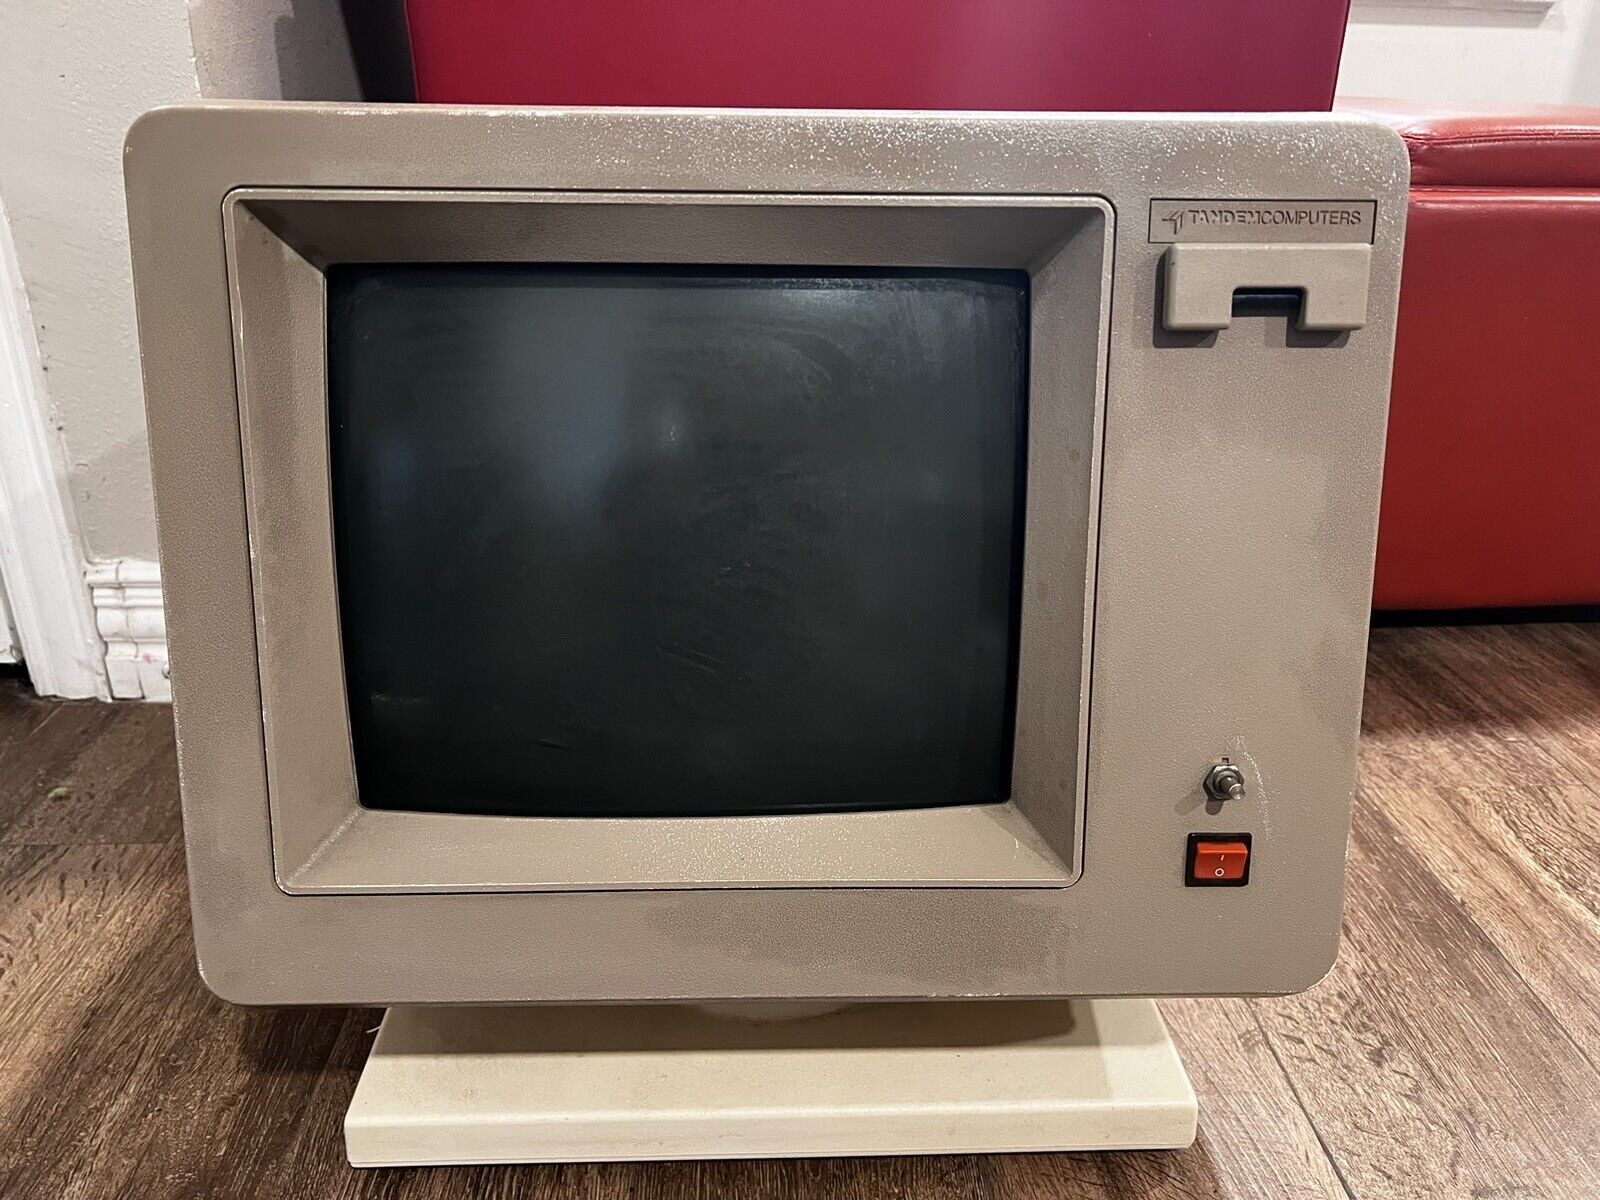 RARE Vintage 1986 TANDEM NON-STOP MAINFRAME COMPUTER Monitor POWERS ON